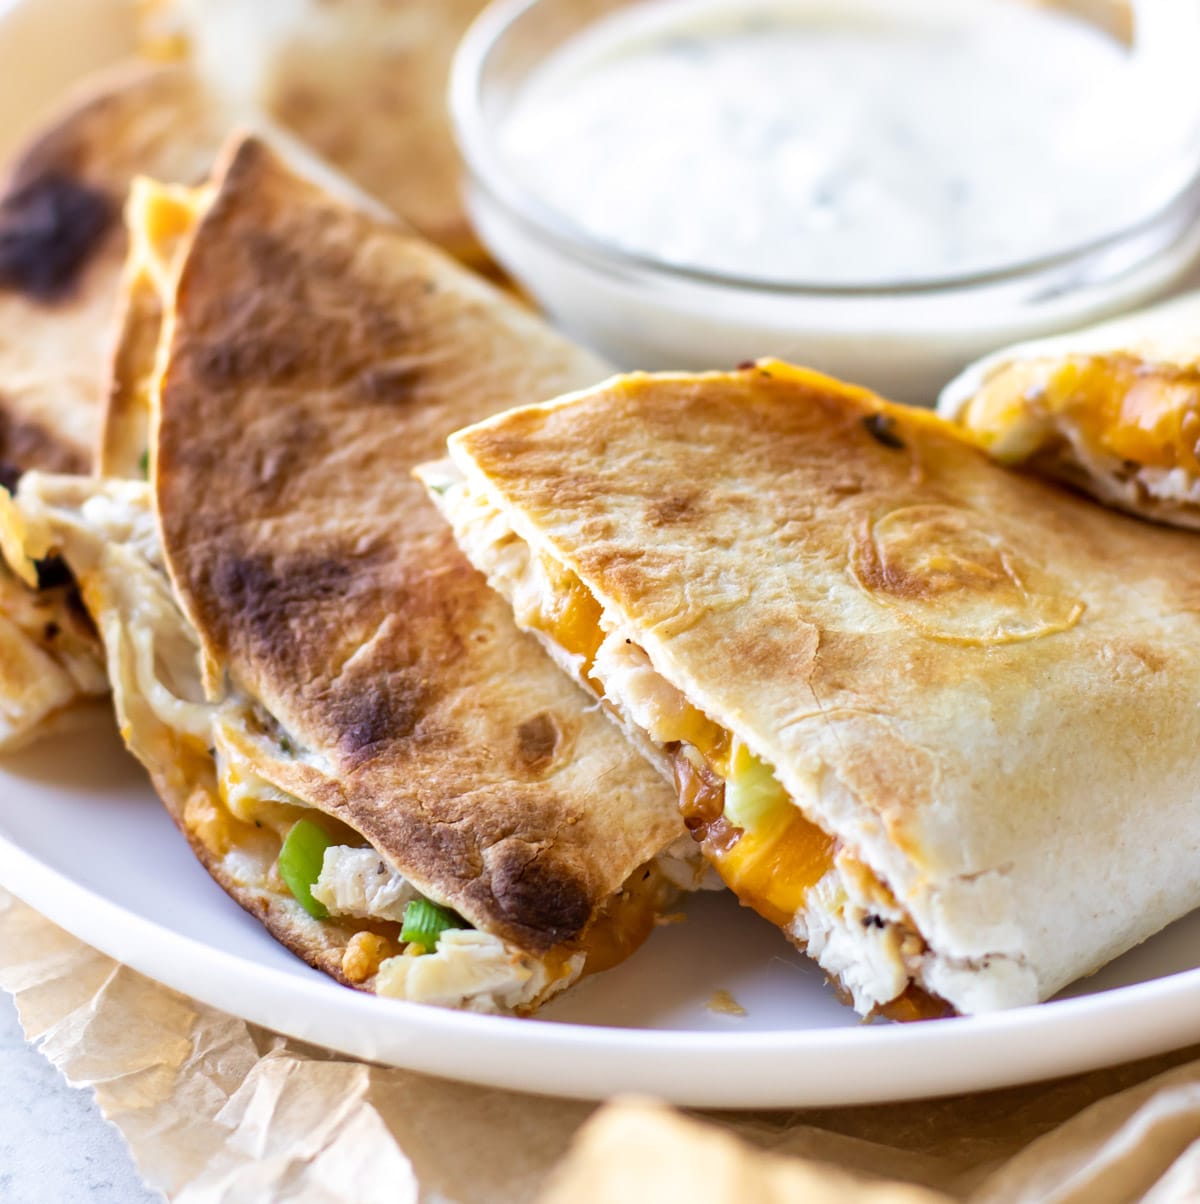 quesadillas on a plate.